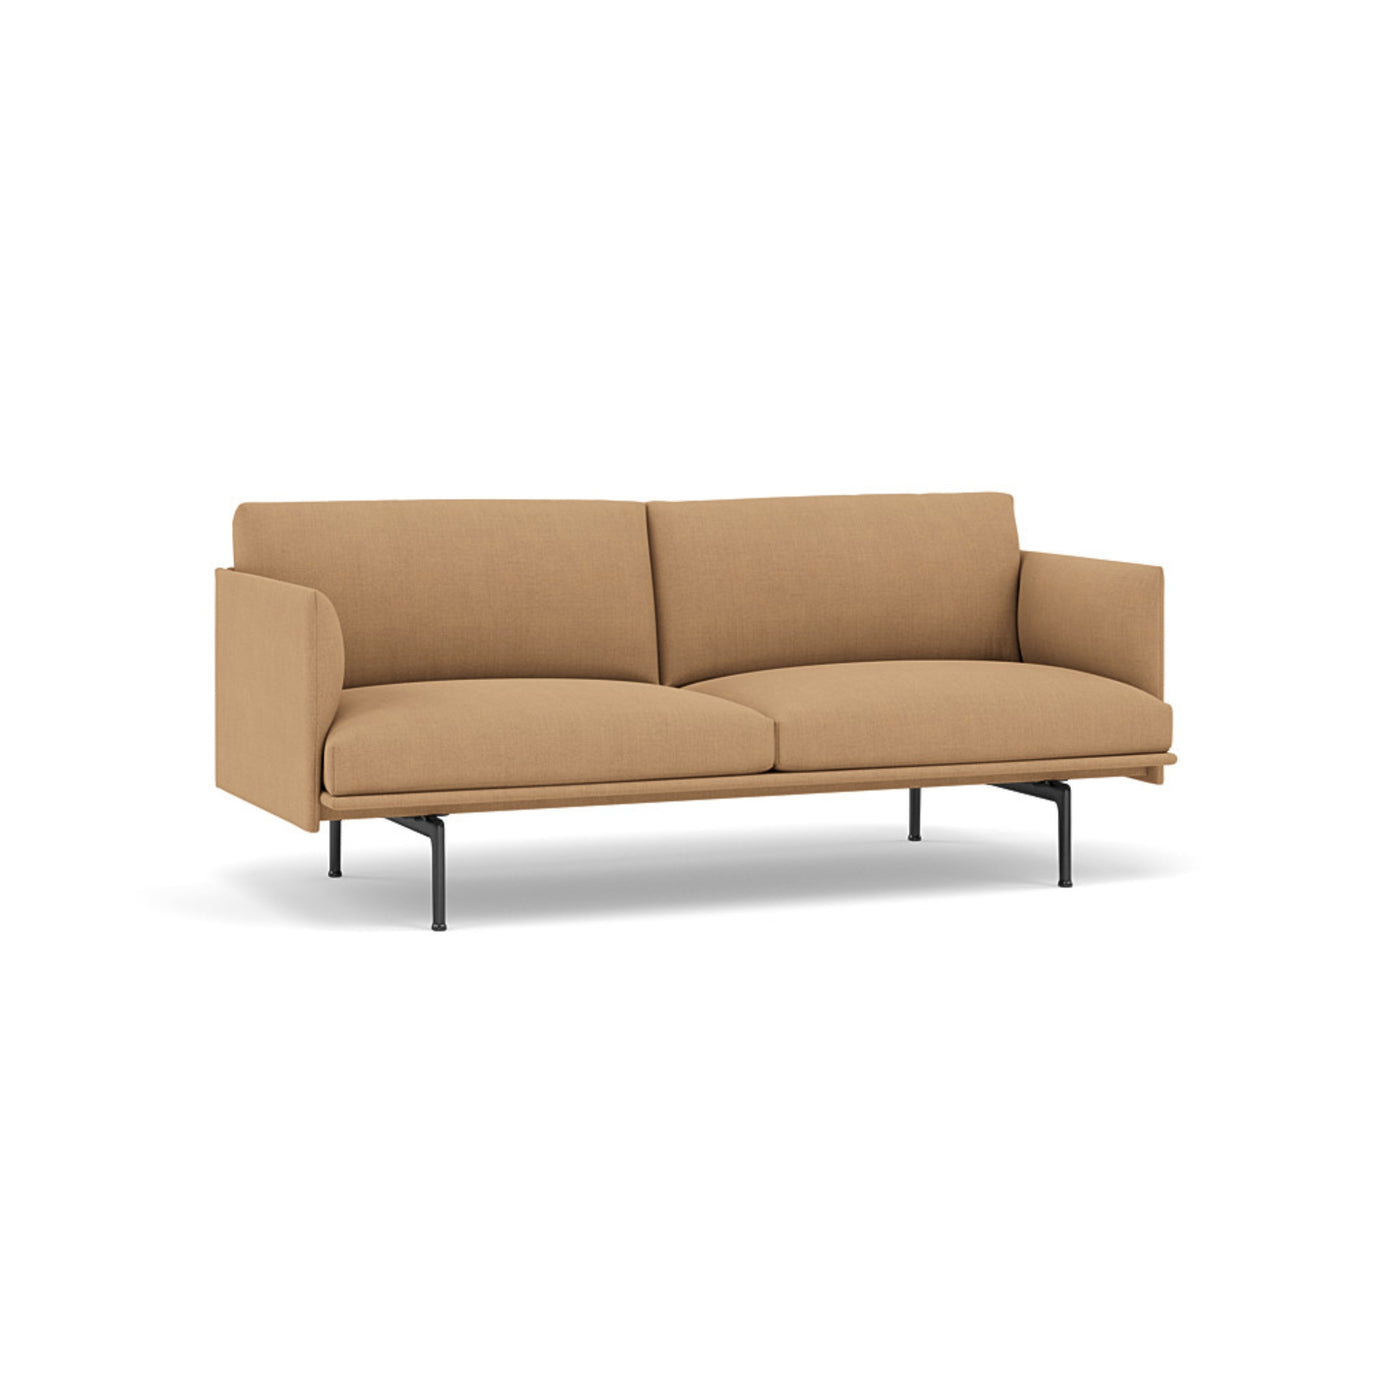 Muuto Outline Studio Sofa. Made to order from someday designs. #colour_fiord-451